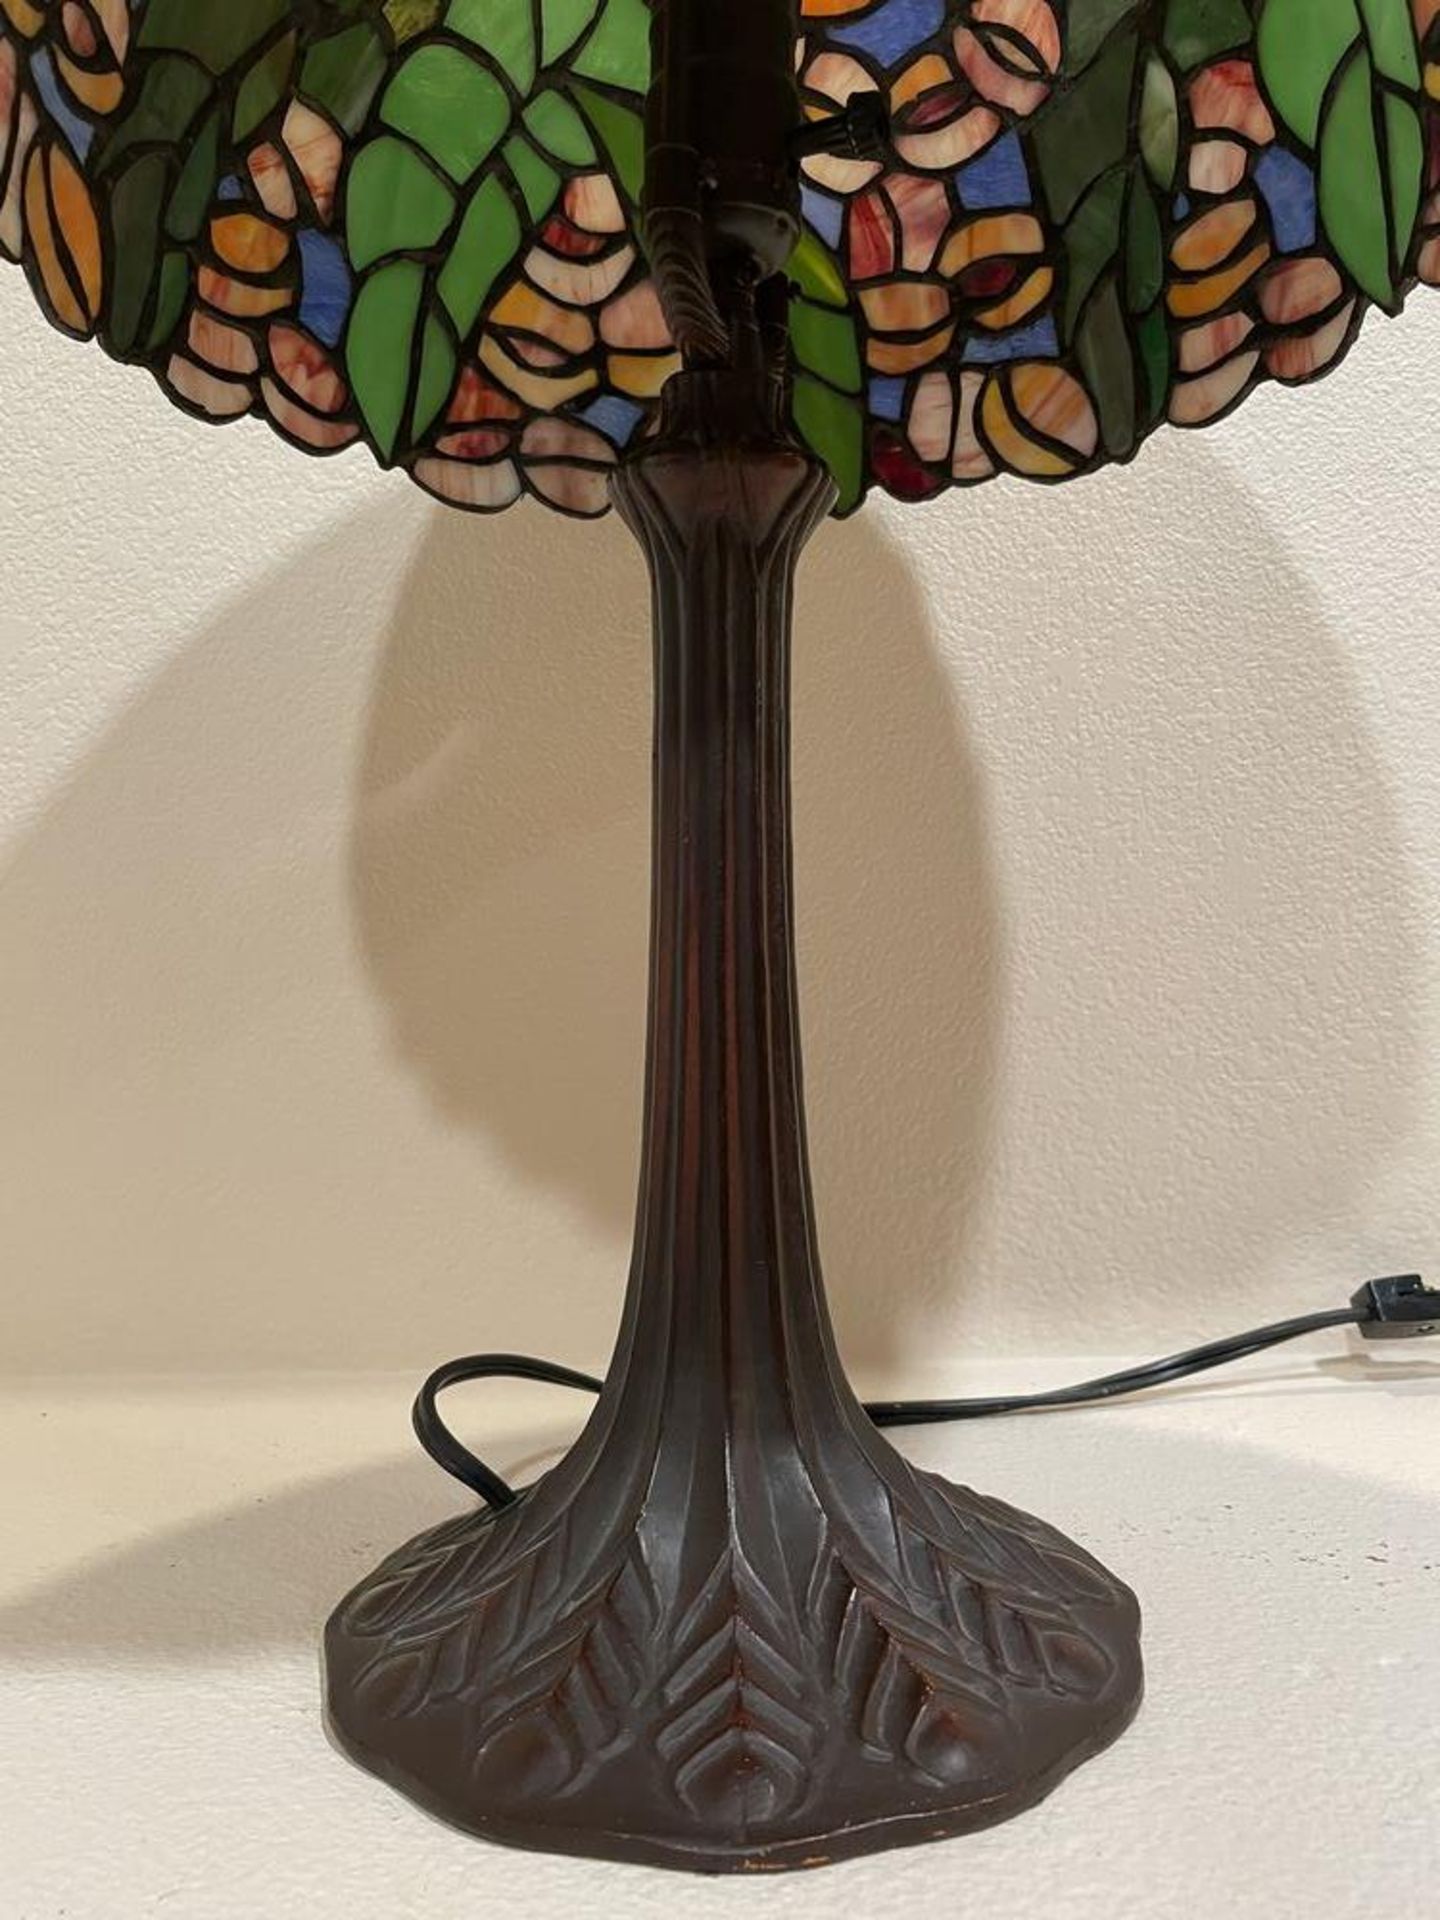 Shorter Tiffany Style Lamp - 21 x 14" - May need to be repaired, not turning on - Image 3 of 4